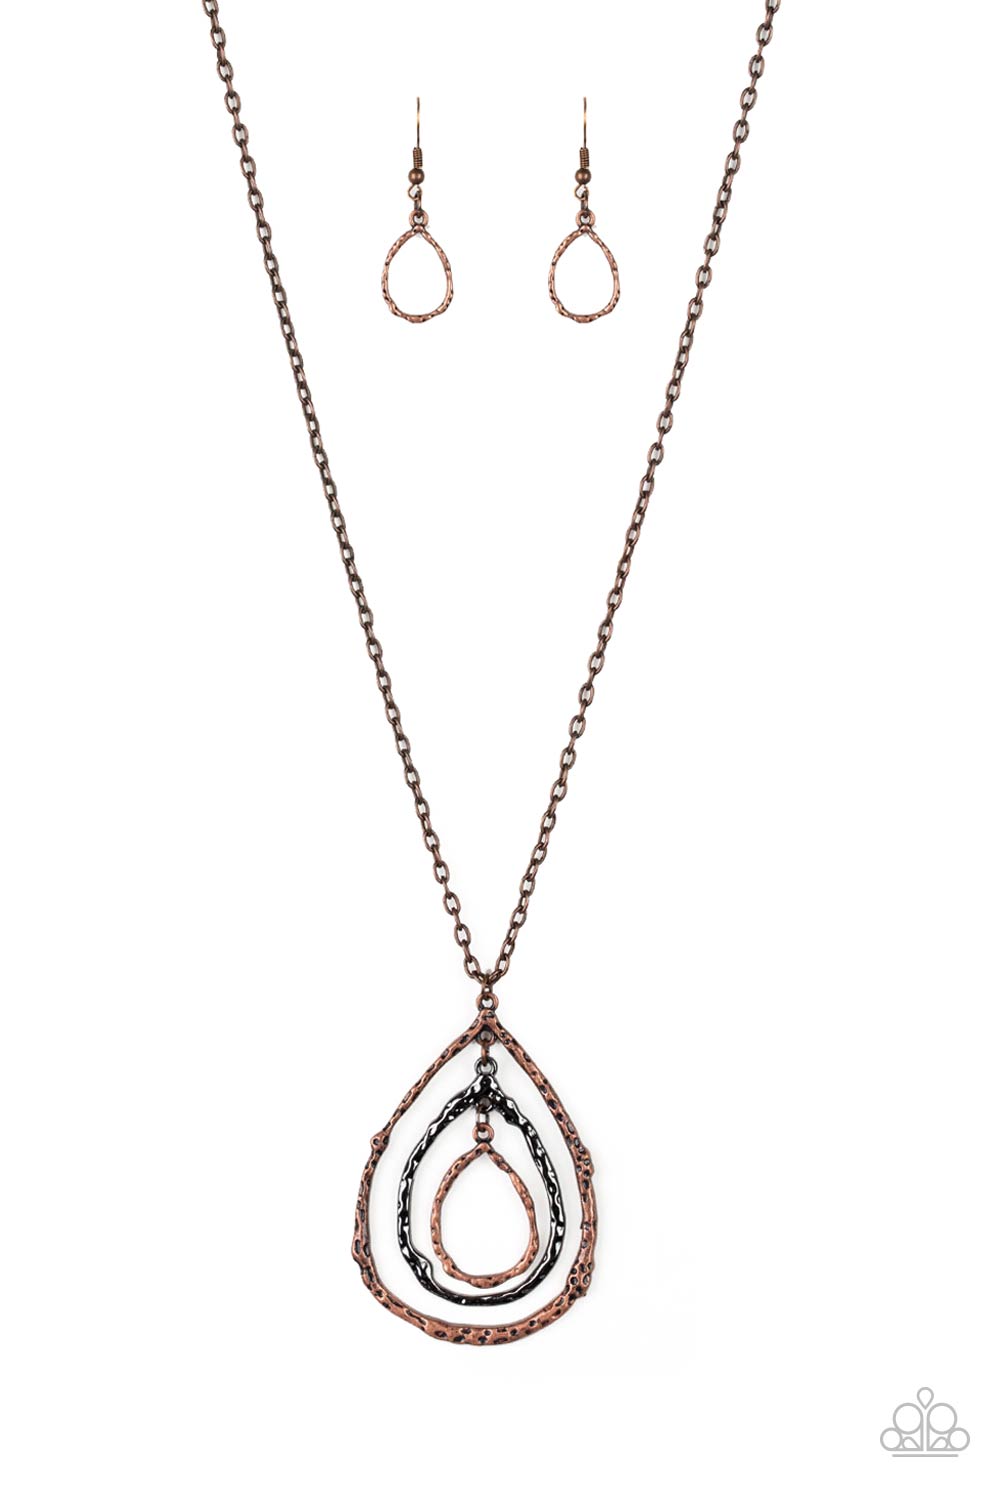 Paparazzi Accessories - Going For Grit - Copper Necklace